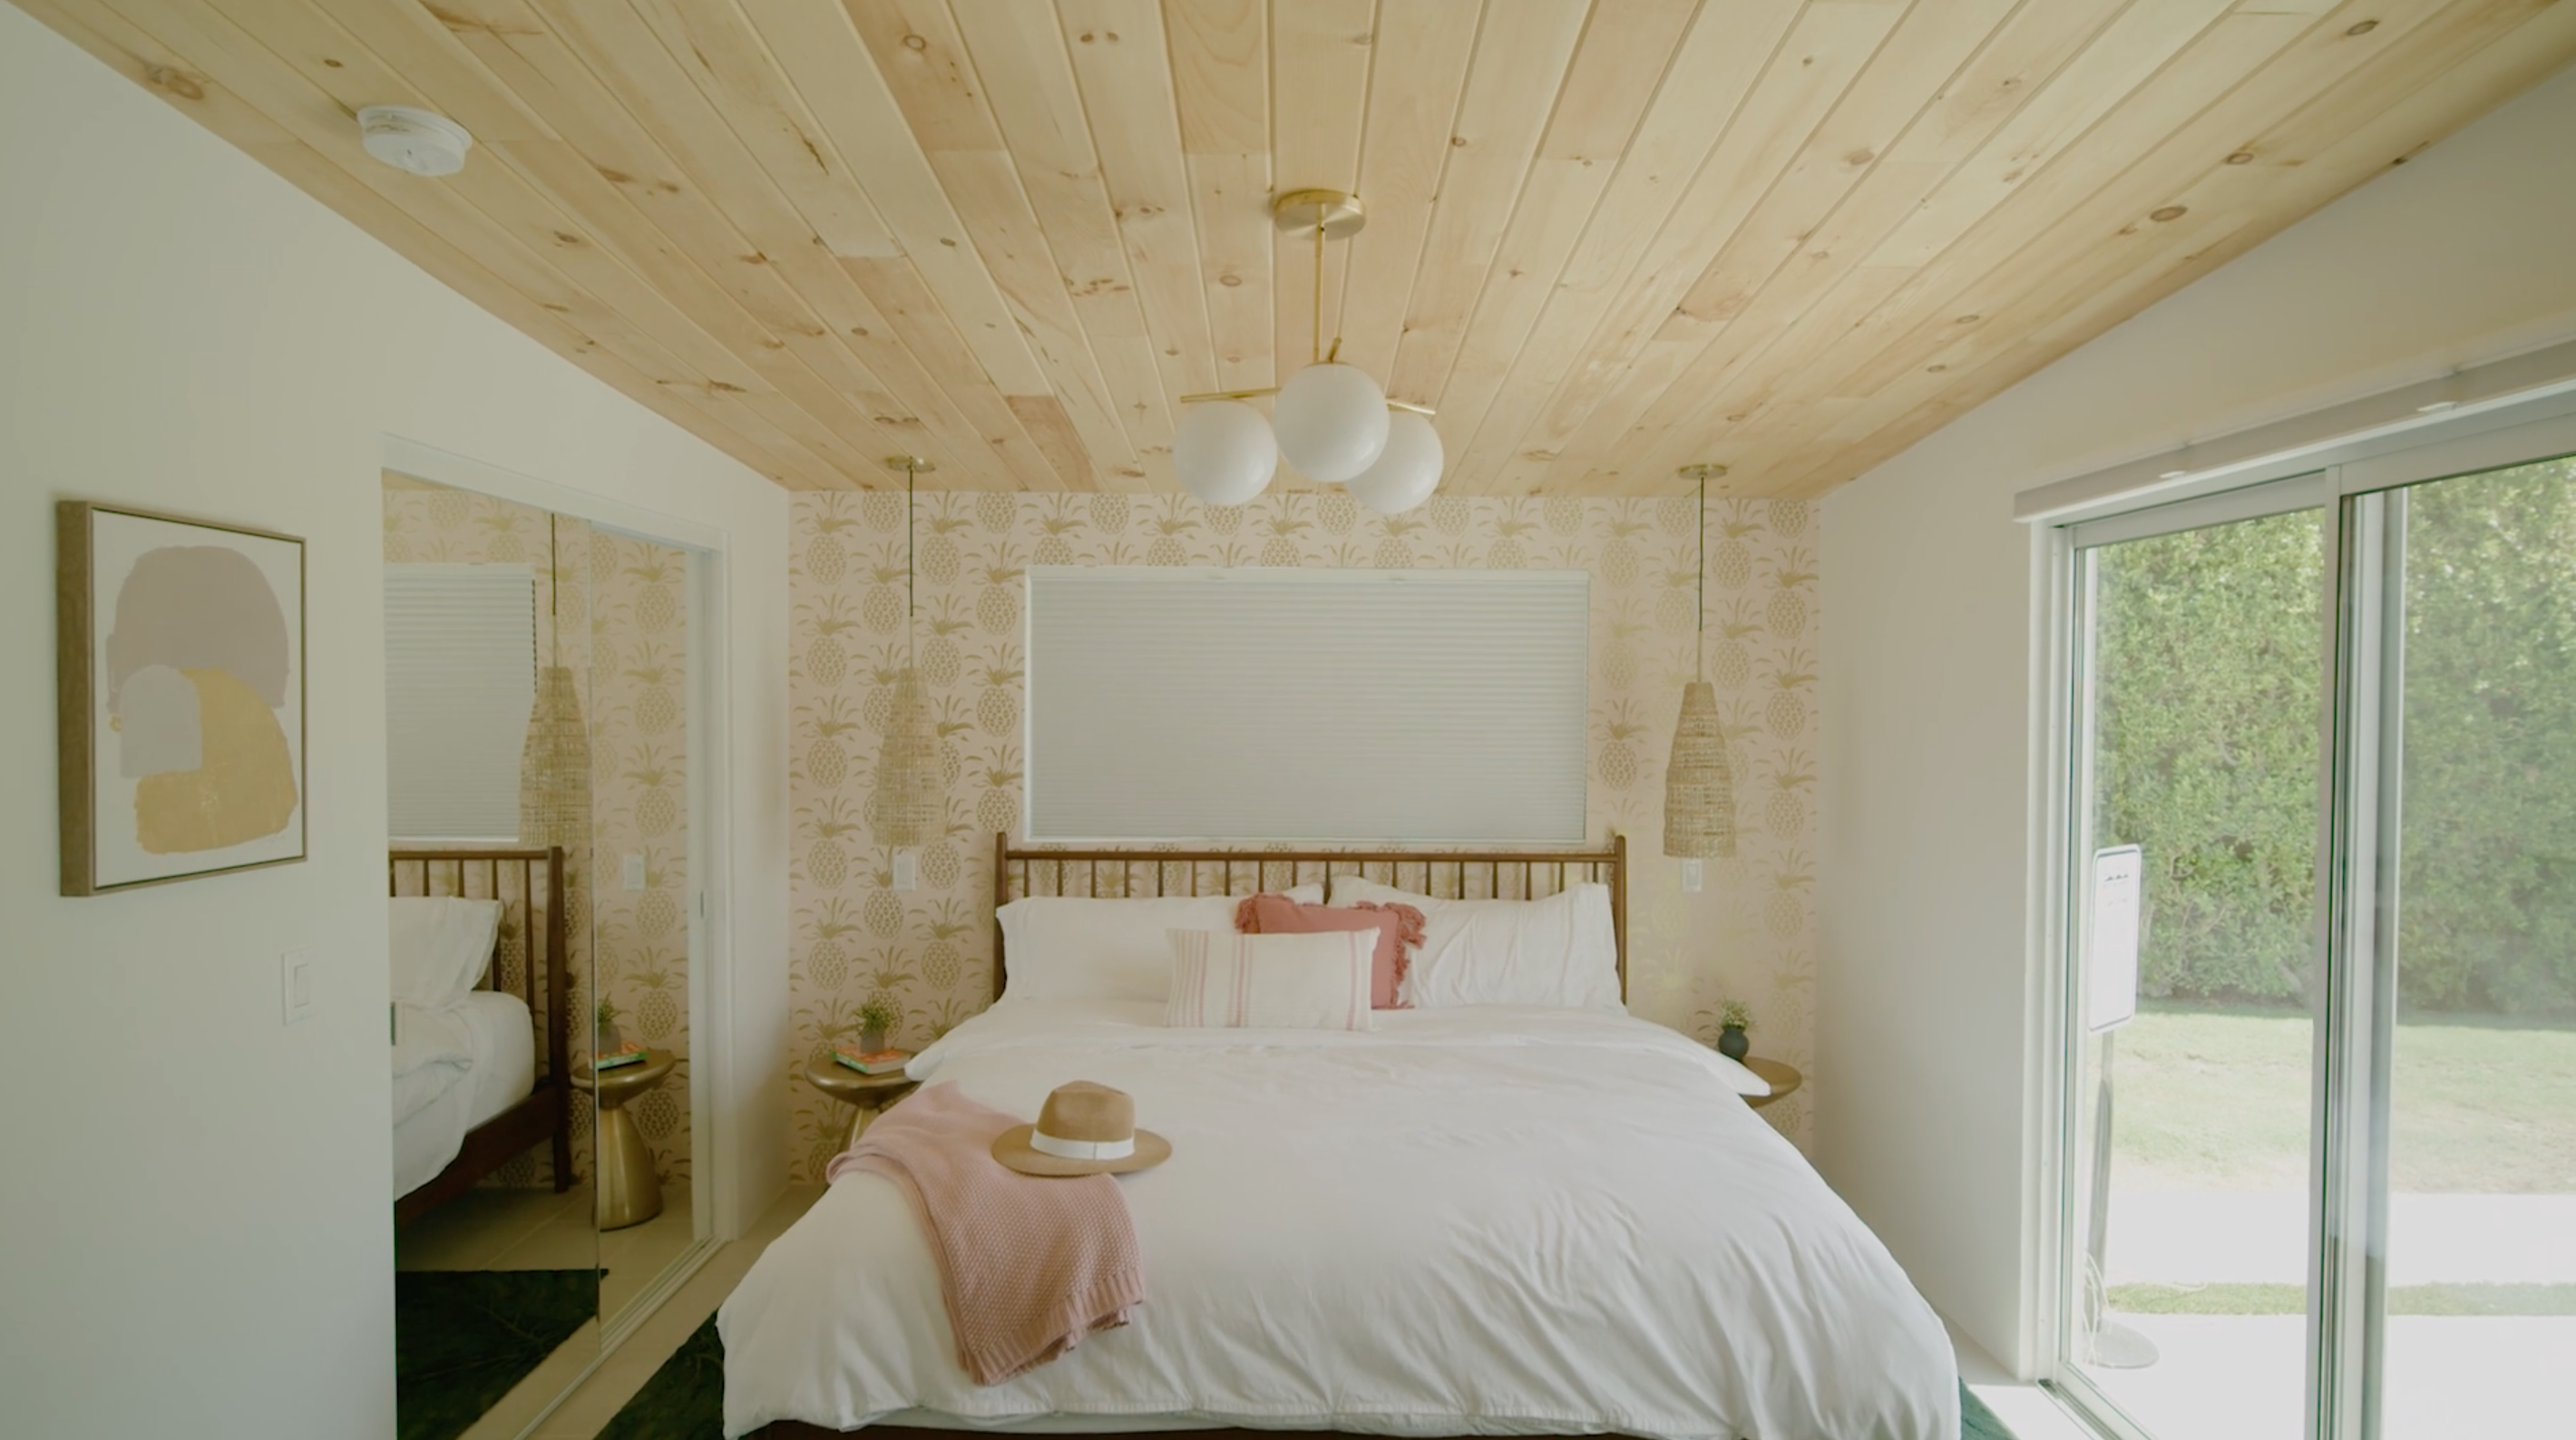 image of a bedroom with wood on ceiling